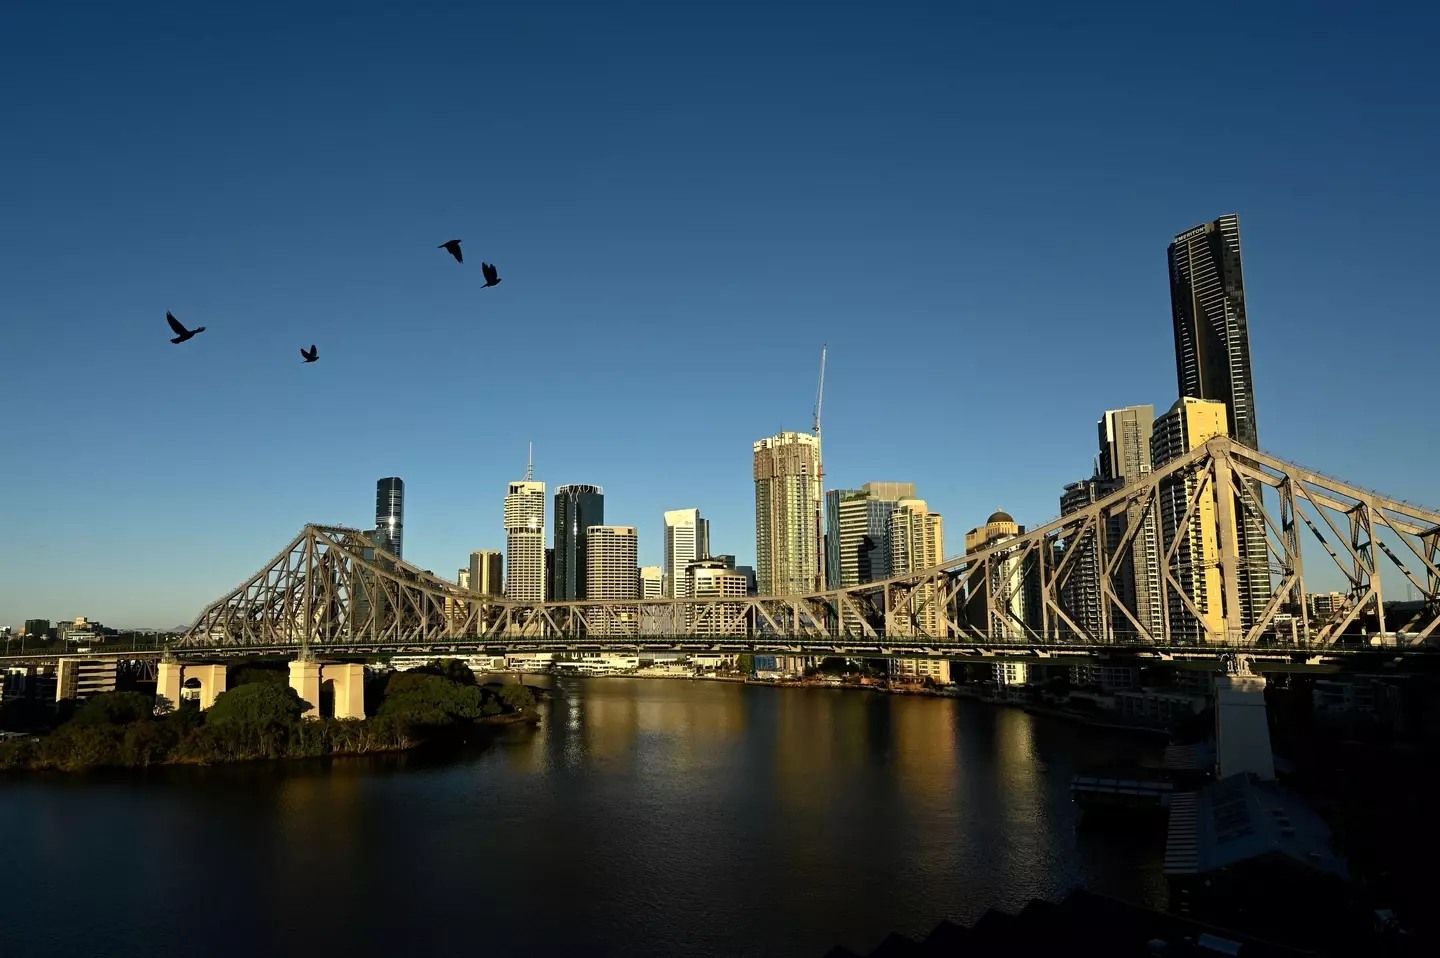 Brisbane was elected to host the 2032 Olympic Games.